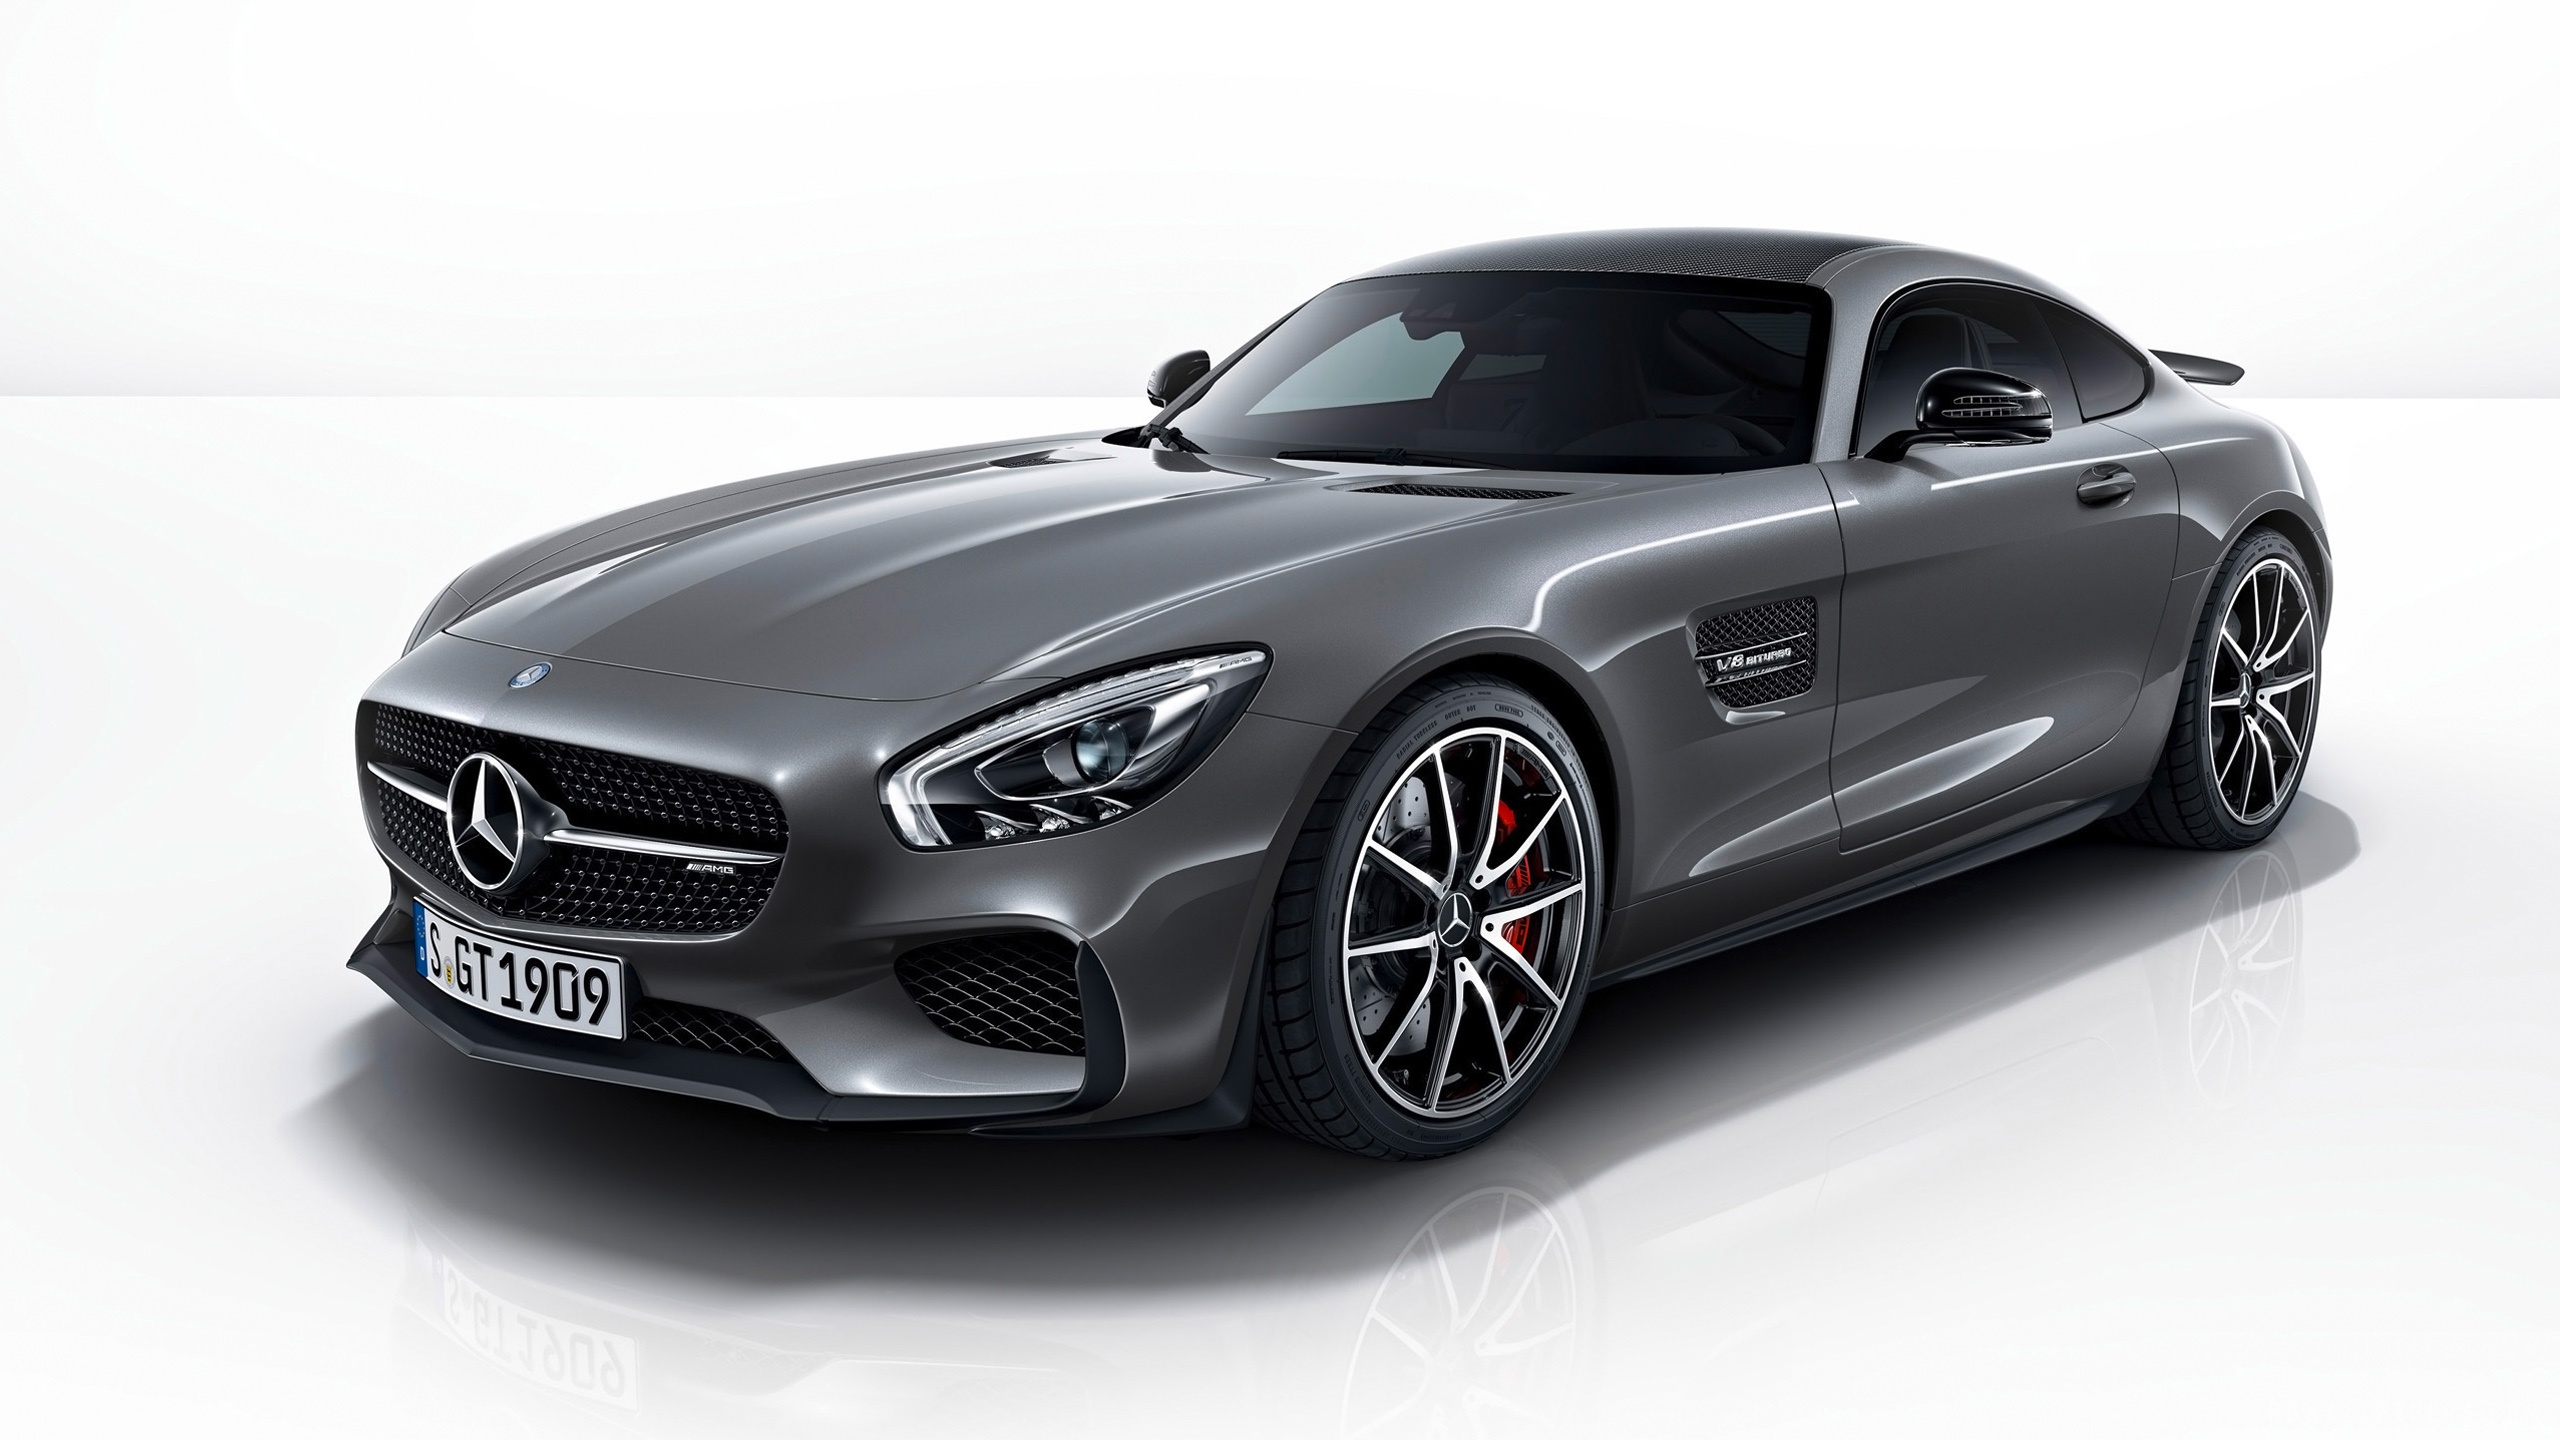 2015 Mercedes AMG GT S Edition 1 HD Wallpaper   iHD Wallpapers